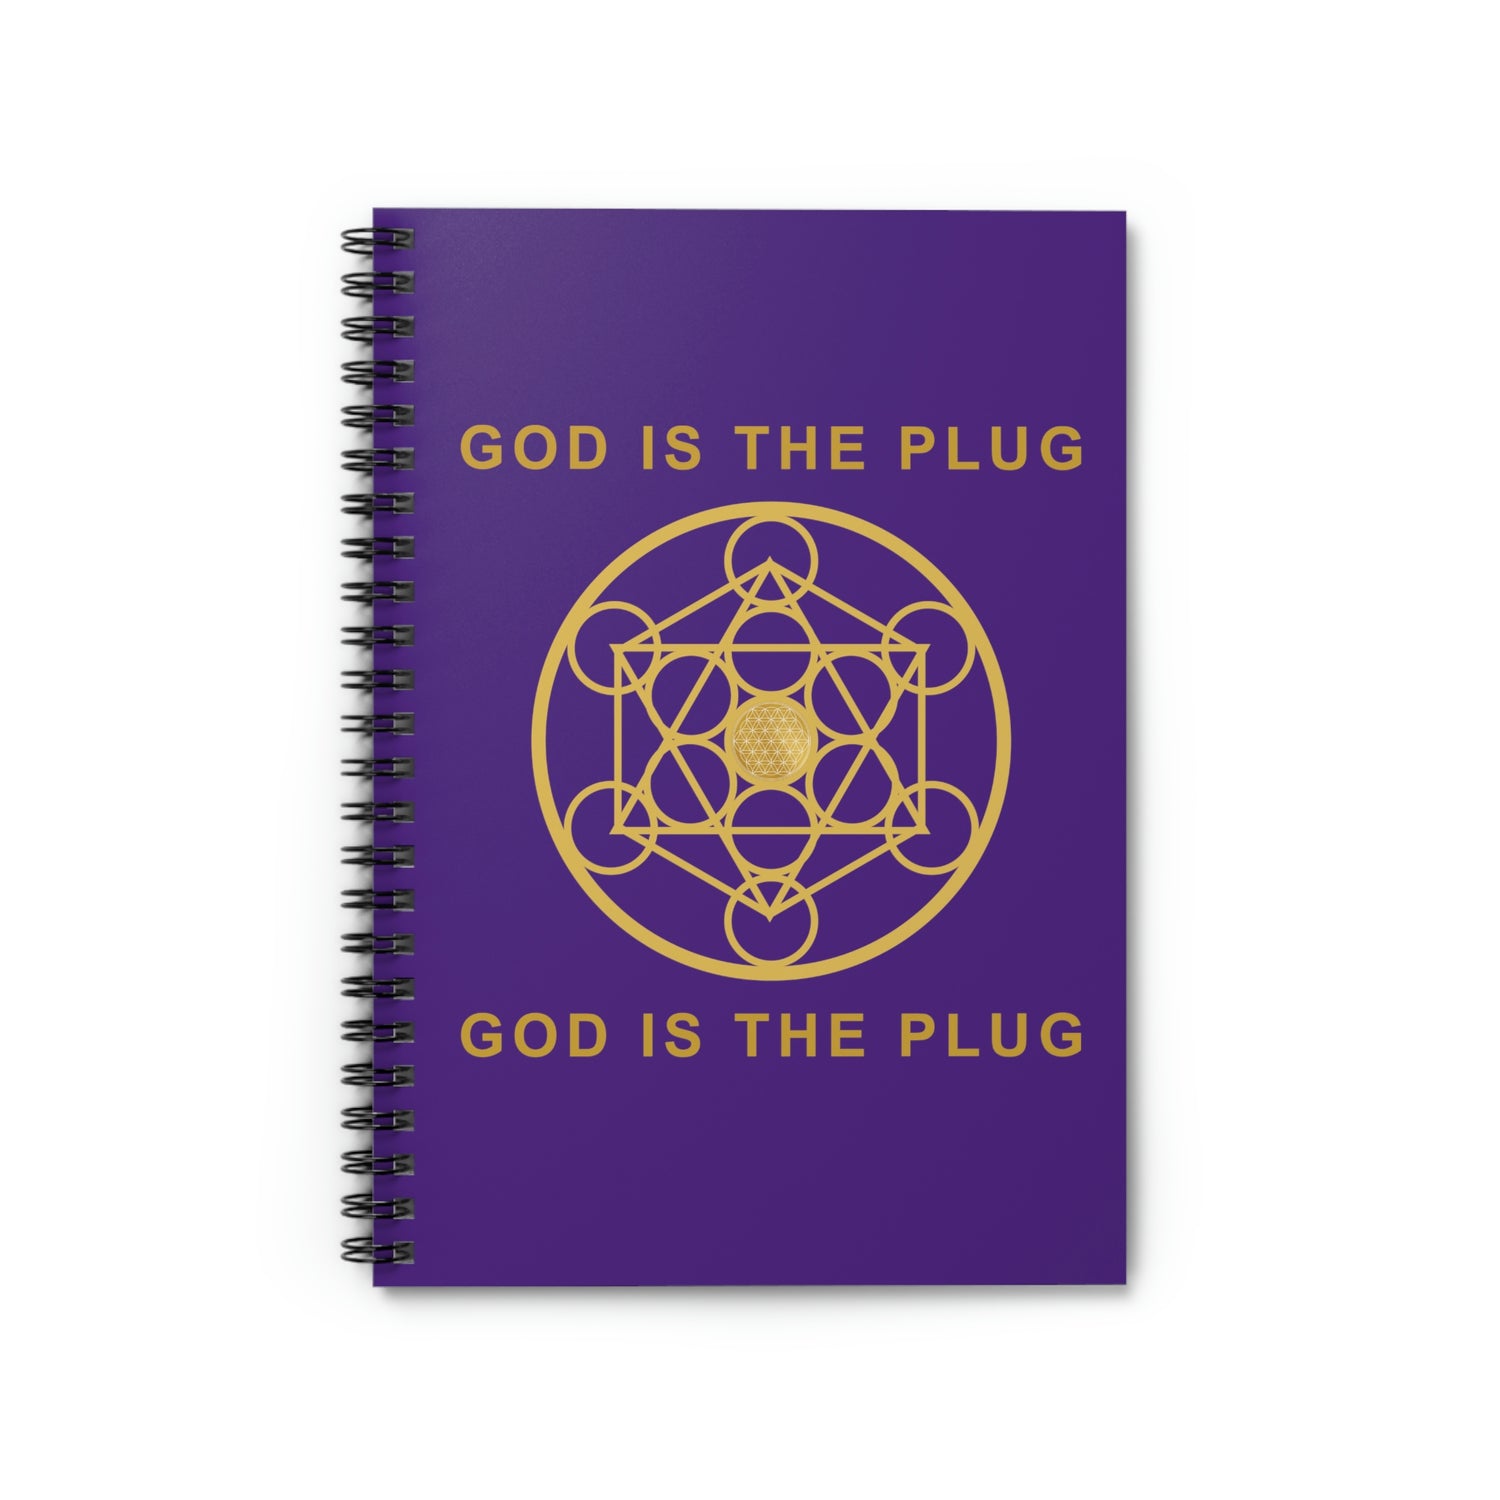 GOD IS THE PLUG - Spiral Notebook - Ruled Line - Purple